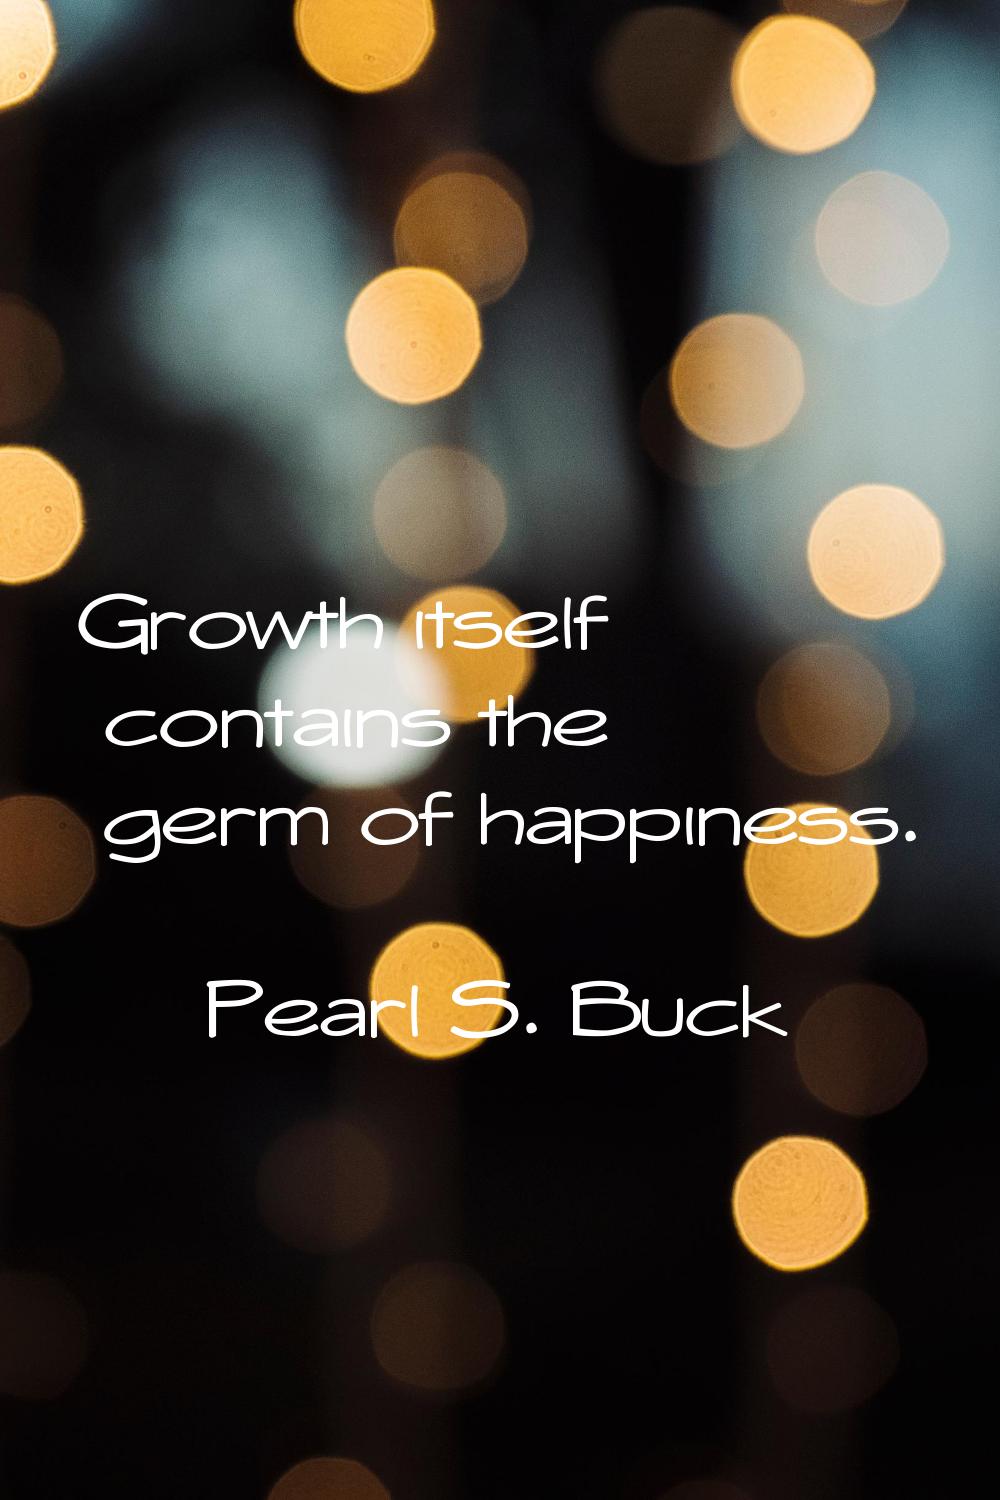 Growth itself contains the germ of happiness.